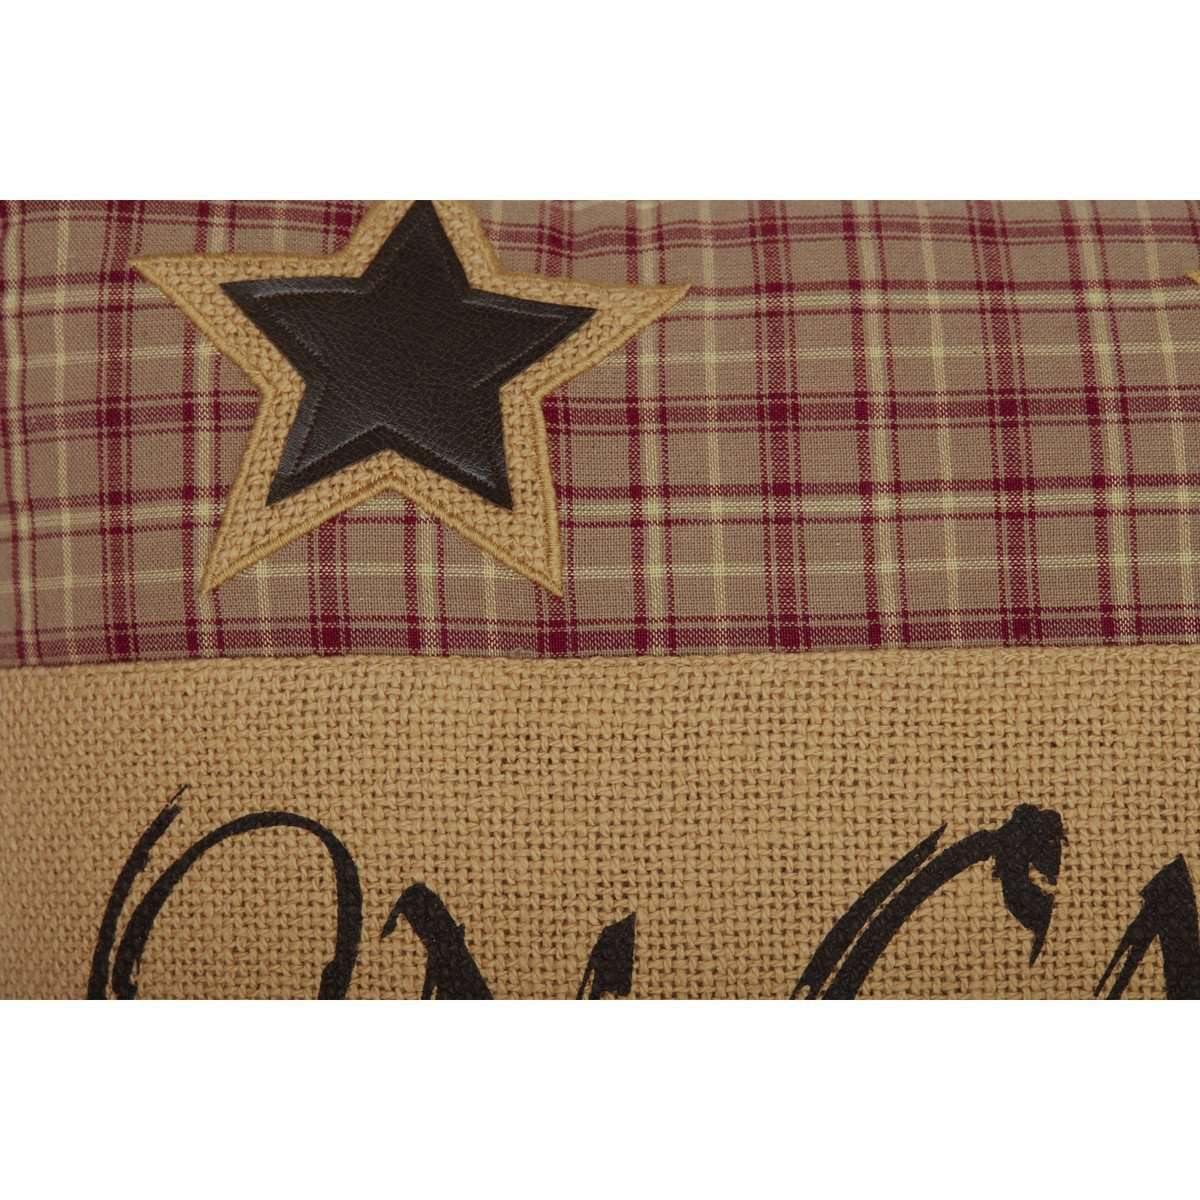 Dawson Star On Cabin Time Pillow 14x22 VHC Brands zoom